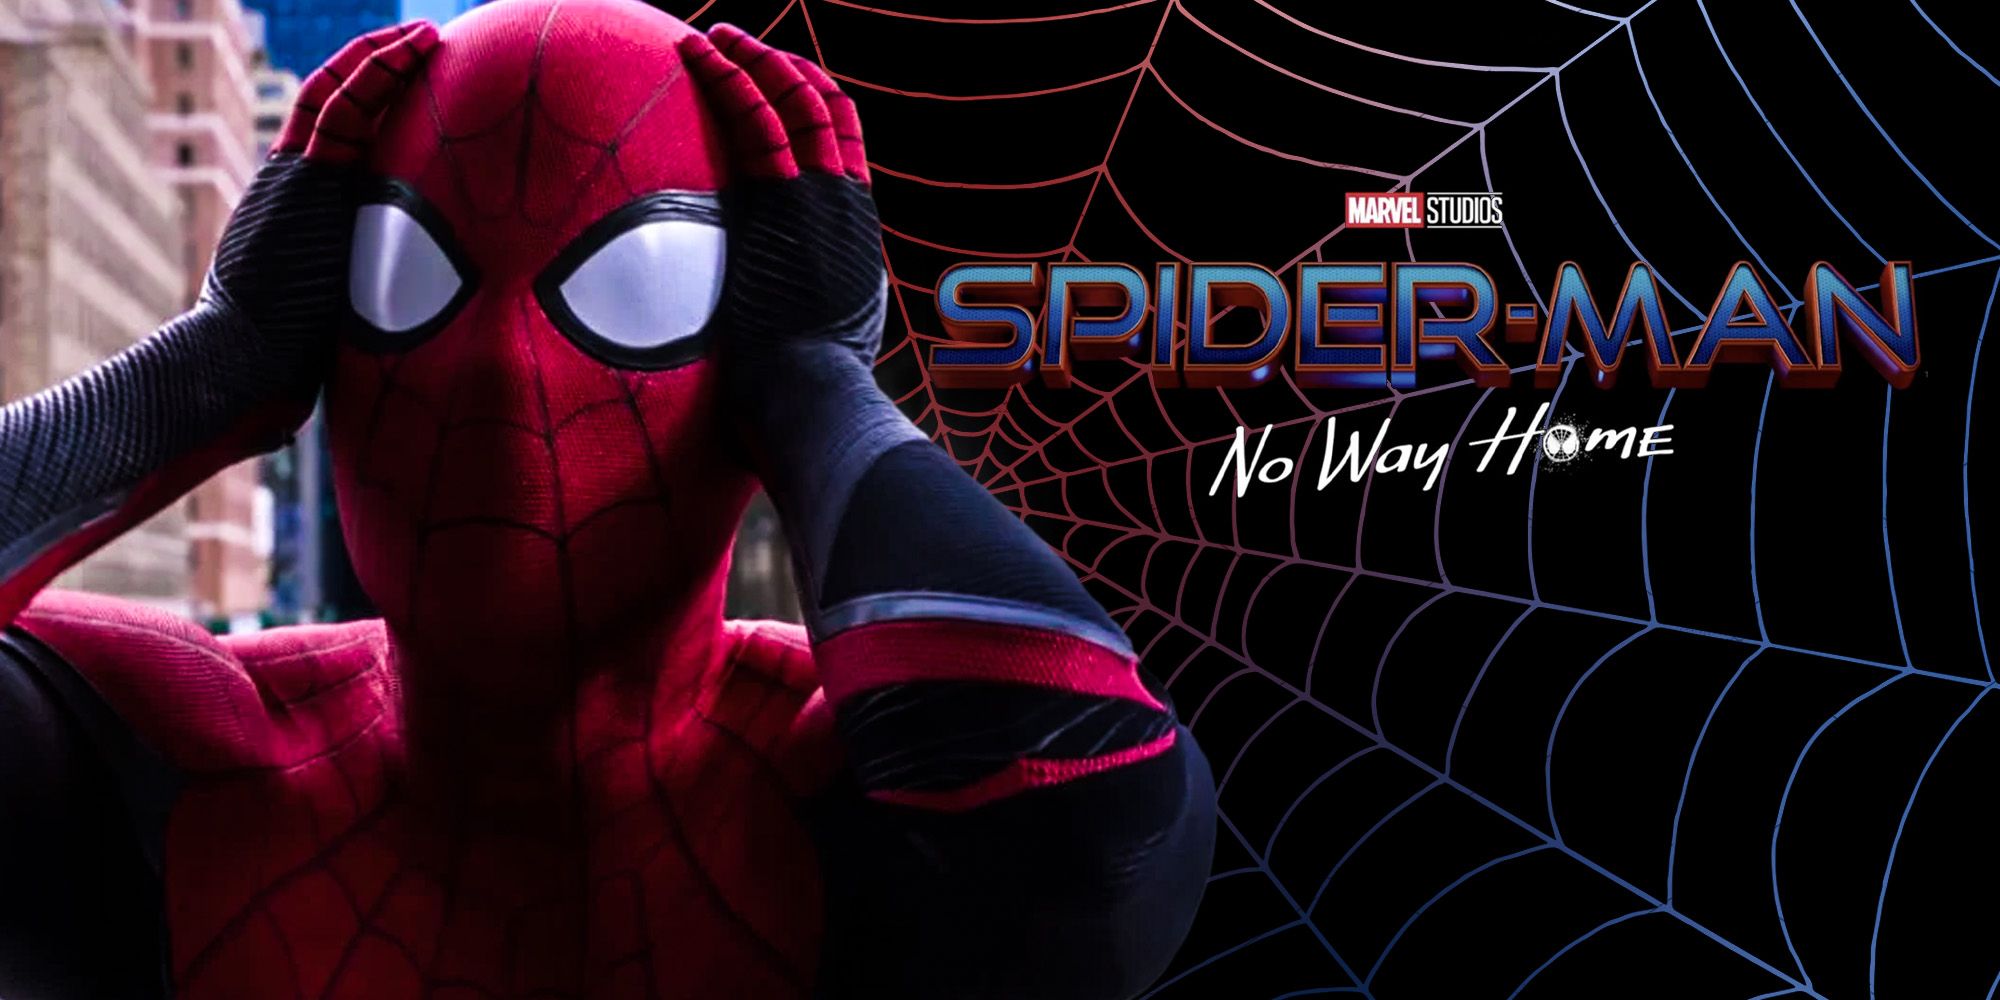 Spiderman far from home spiderman no way home